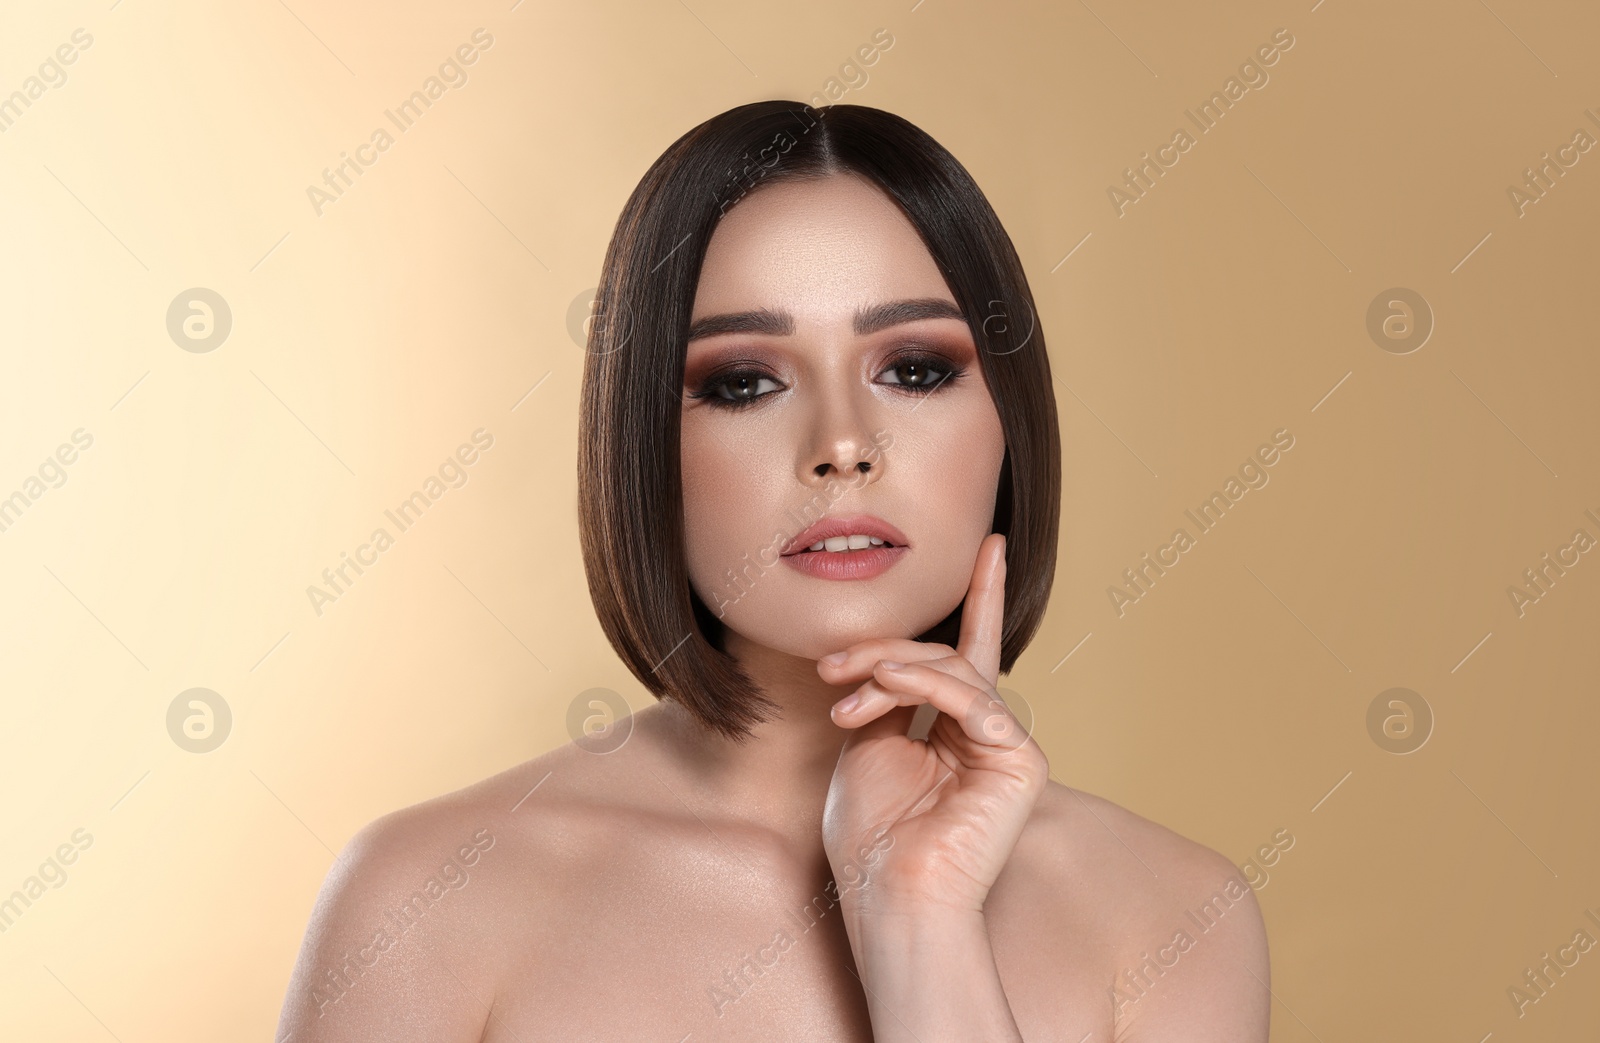 Image of Portrait of pretty young woman with brown hair on beige background